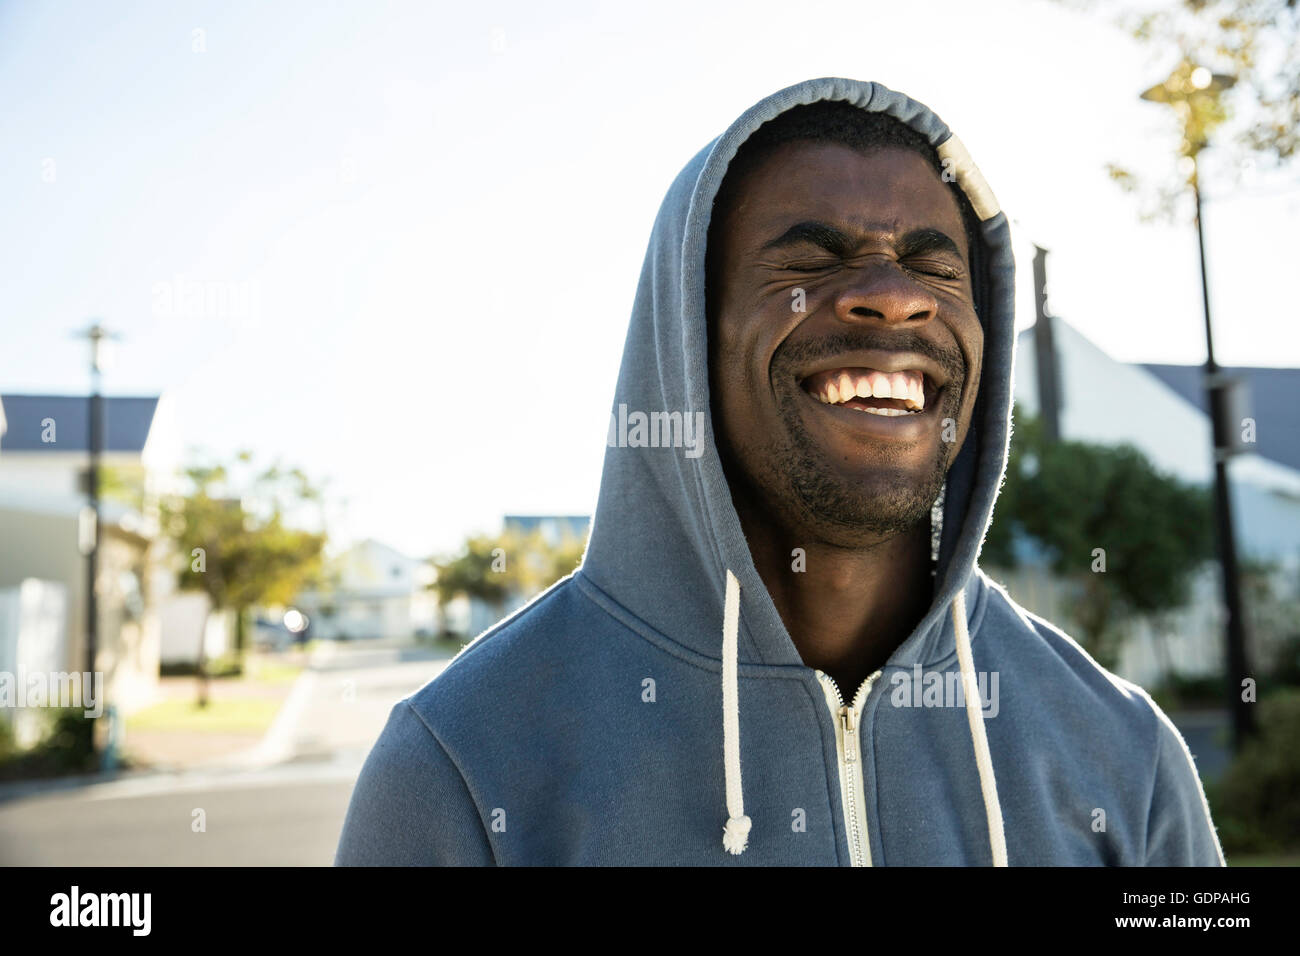 Portrait of man wearing hooded top eyes closed laughing Stock Photo